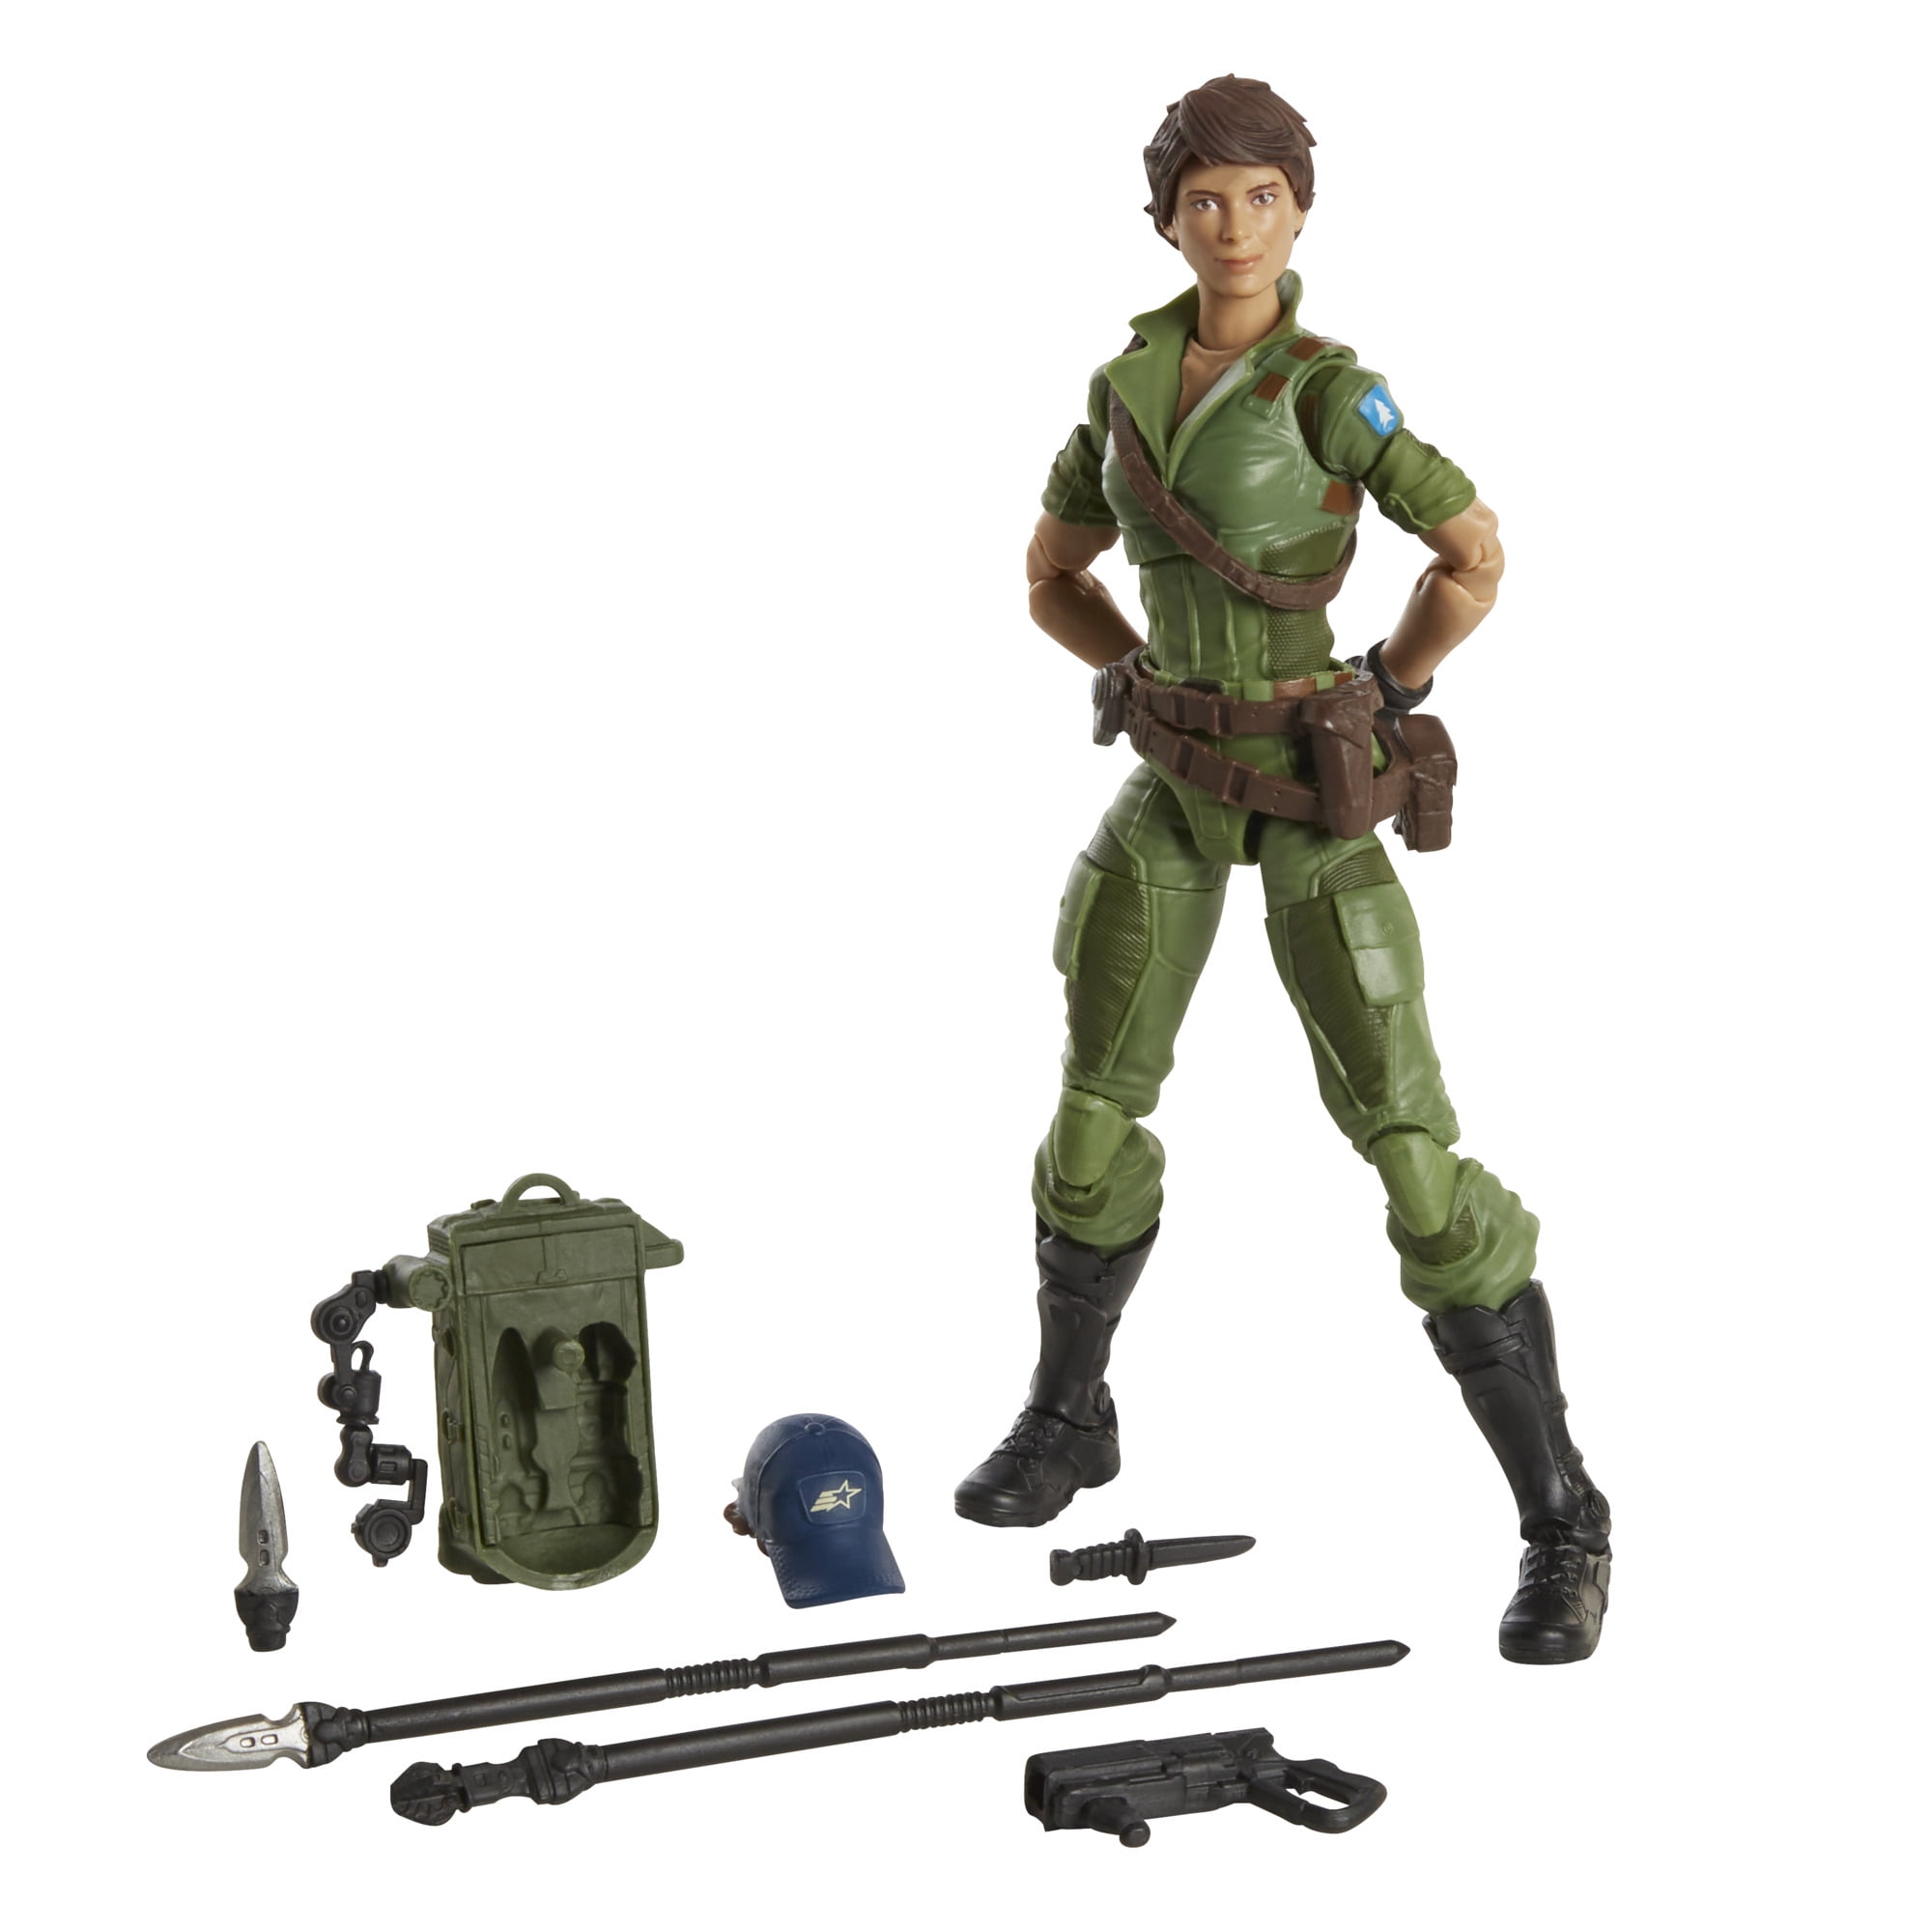 Gifts Army Toy Soldiers Action Figures -144 Pack Party Favors For GI Joes 